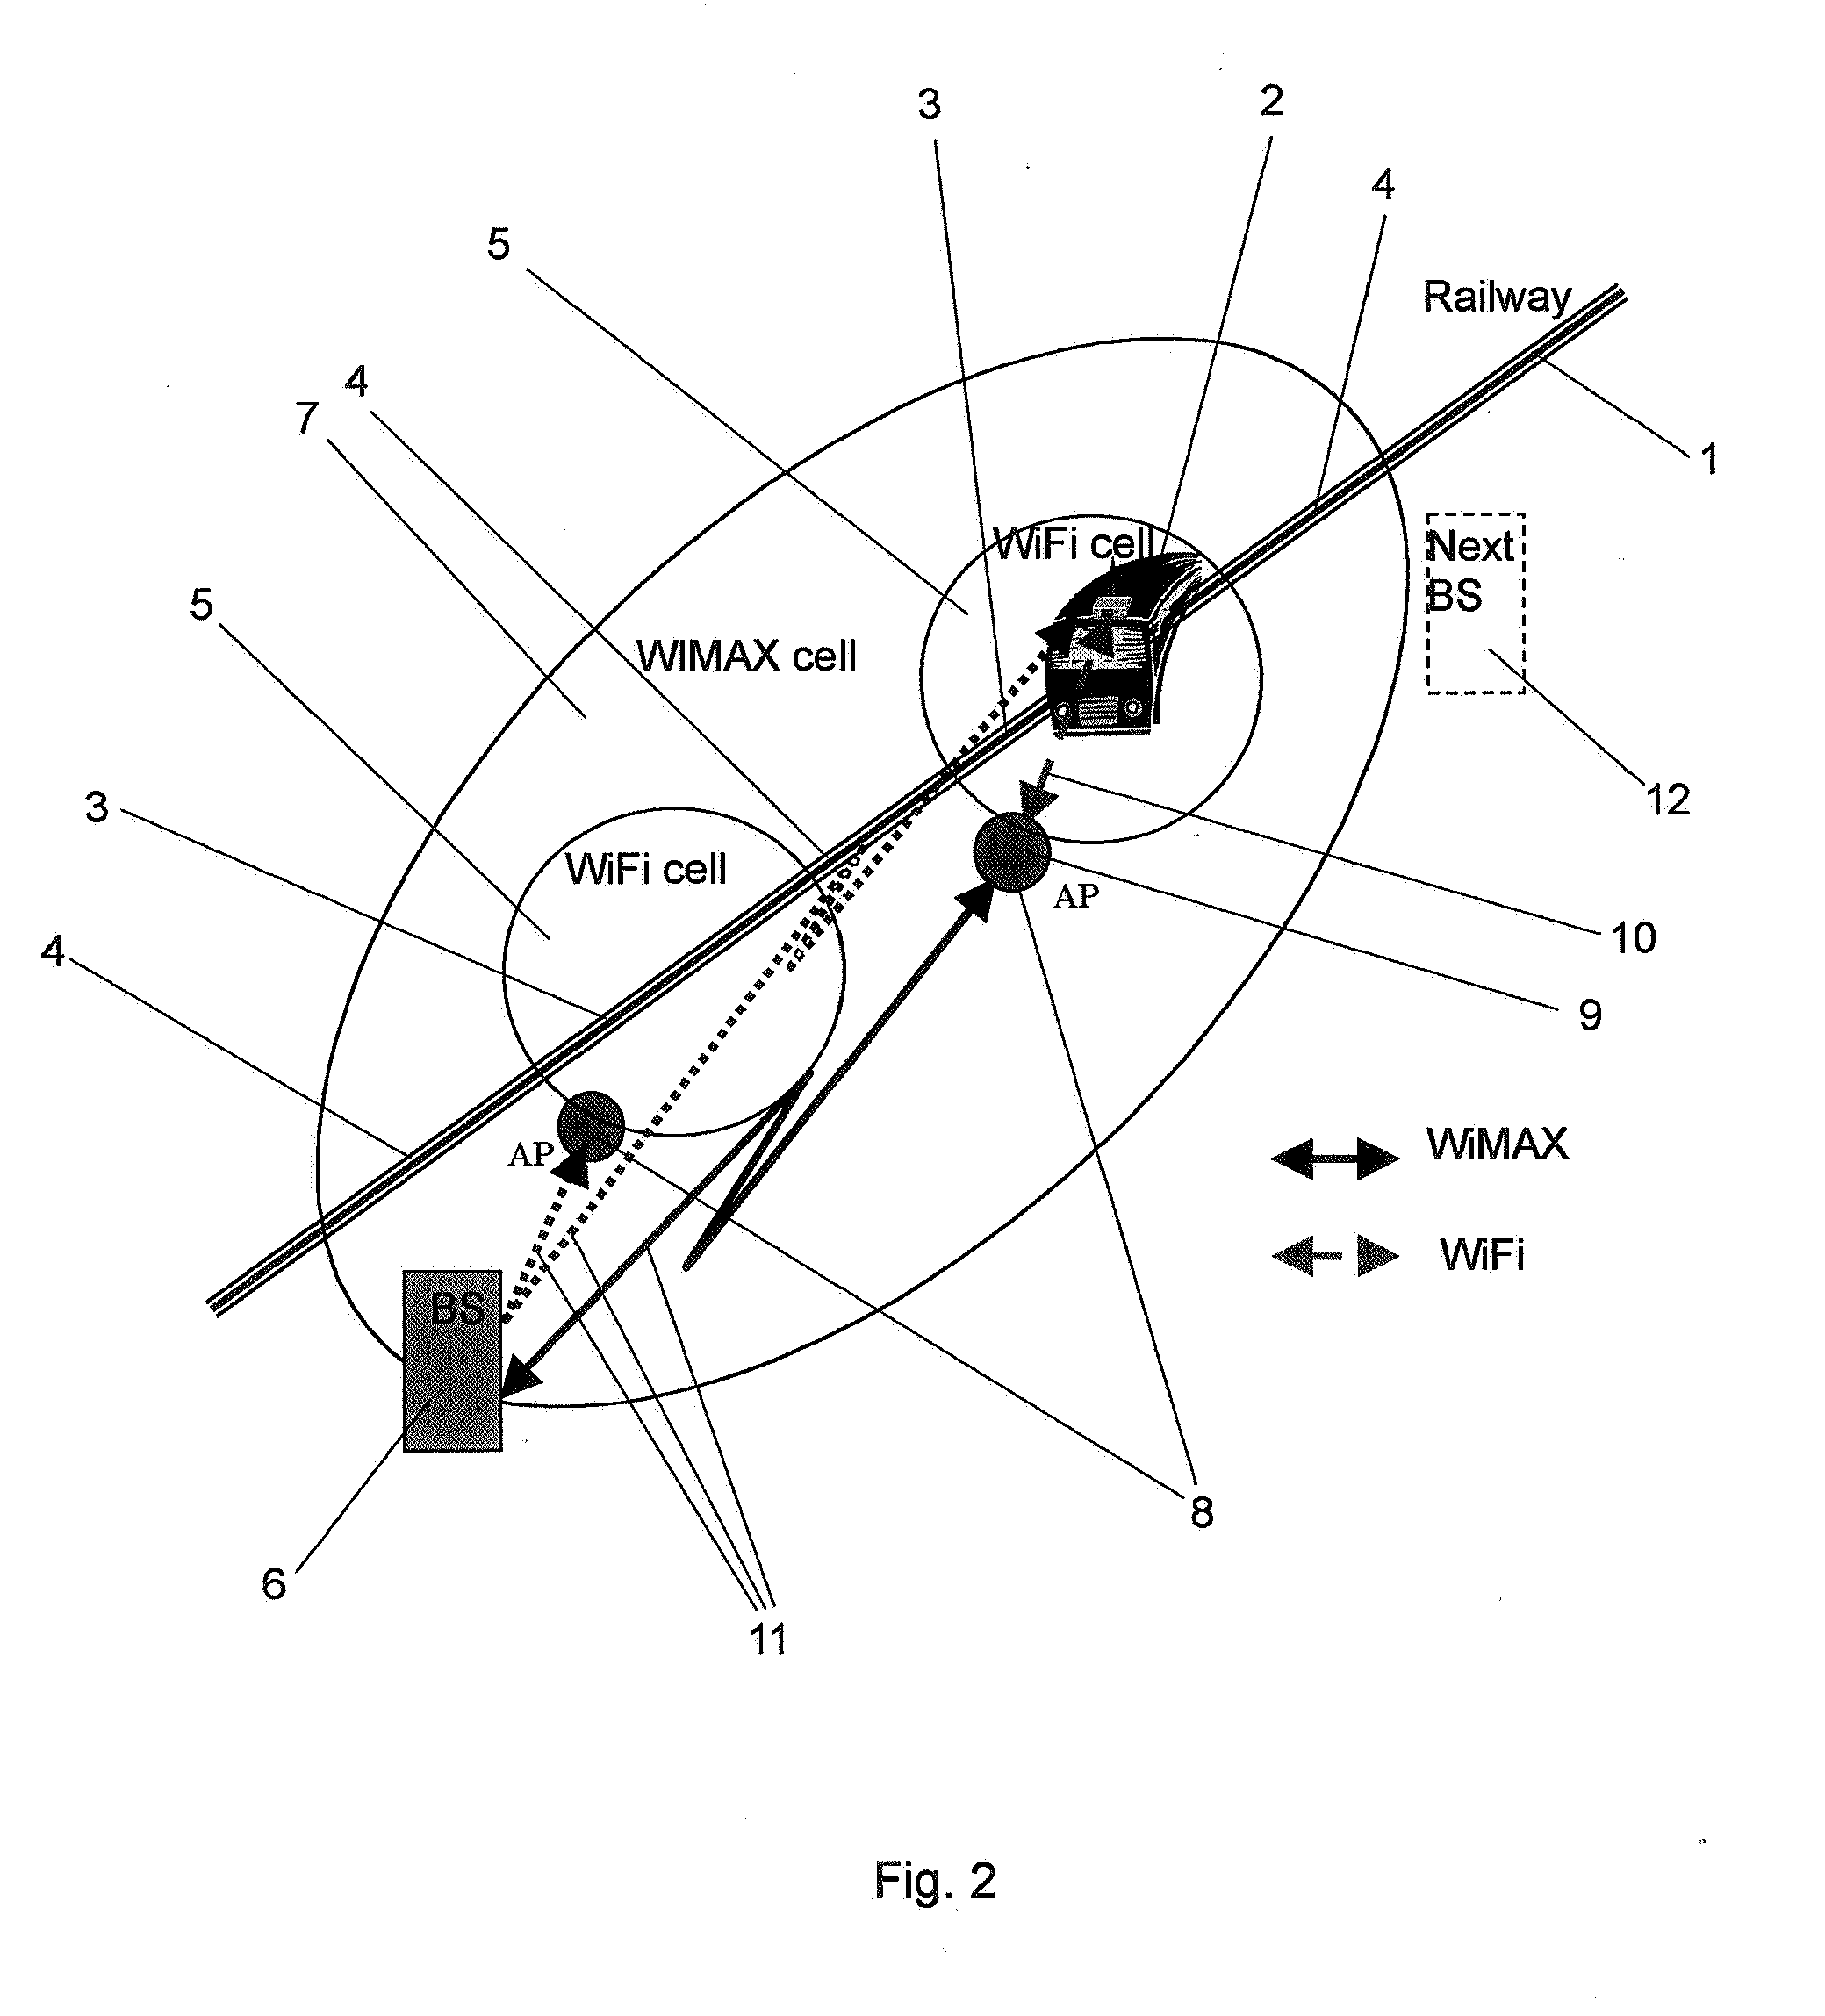 Method to provide wireless broadband communication to a high-speed movable vehicle